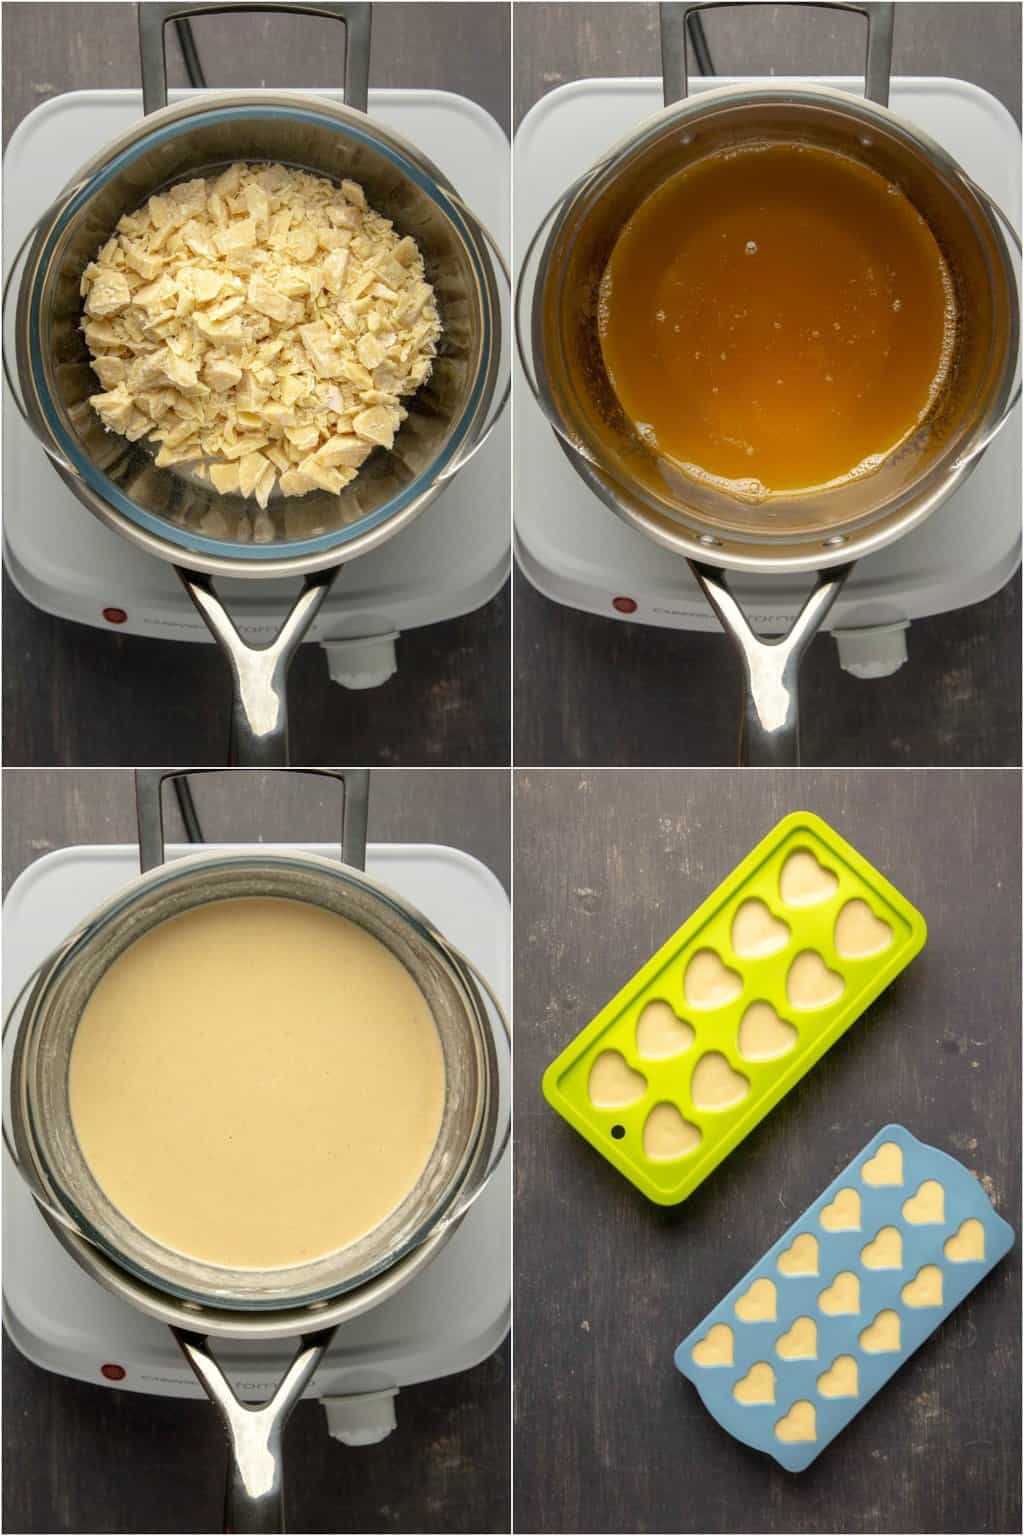 Step by step process photo collage of making vegan white chocolate.